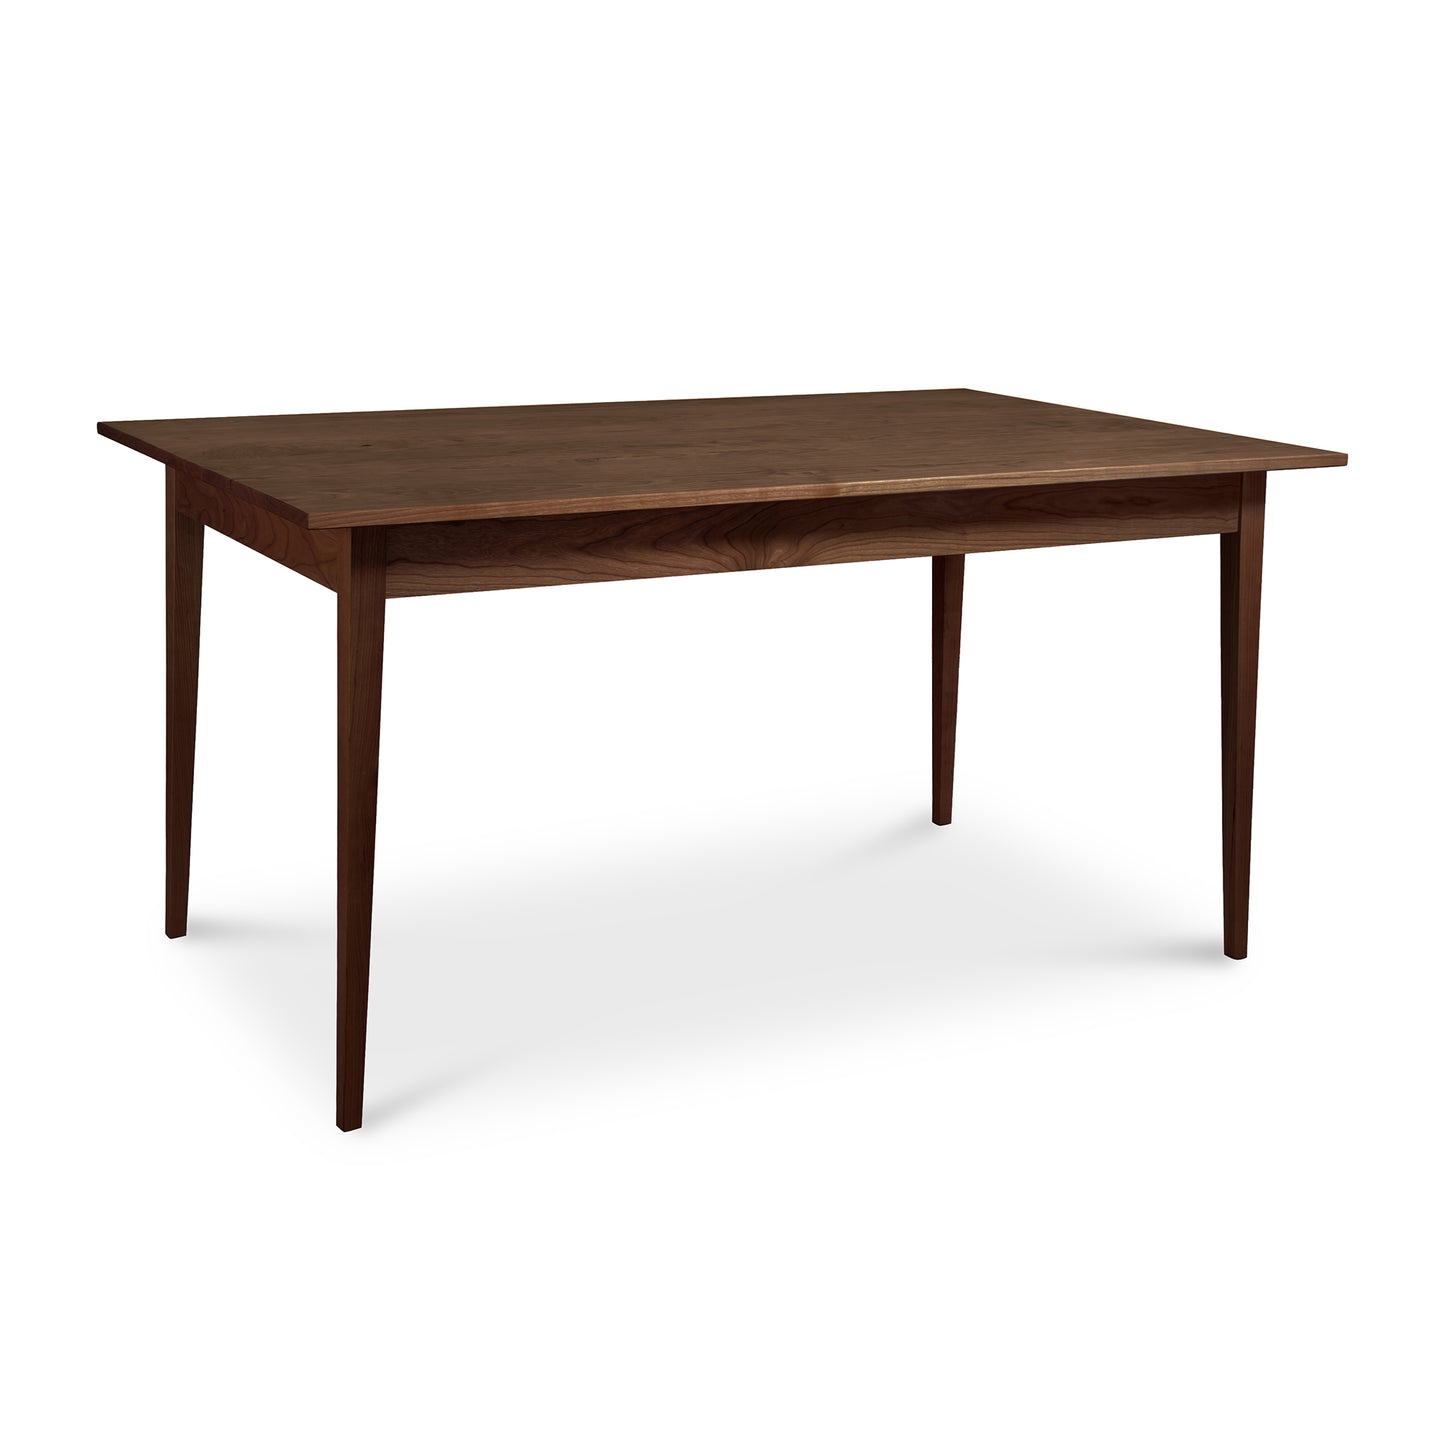 A Vermont Woods Studios Country Shaker Dining Table featuring a solid natural wood top and legs, offering different wood options.